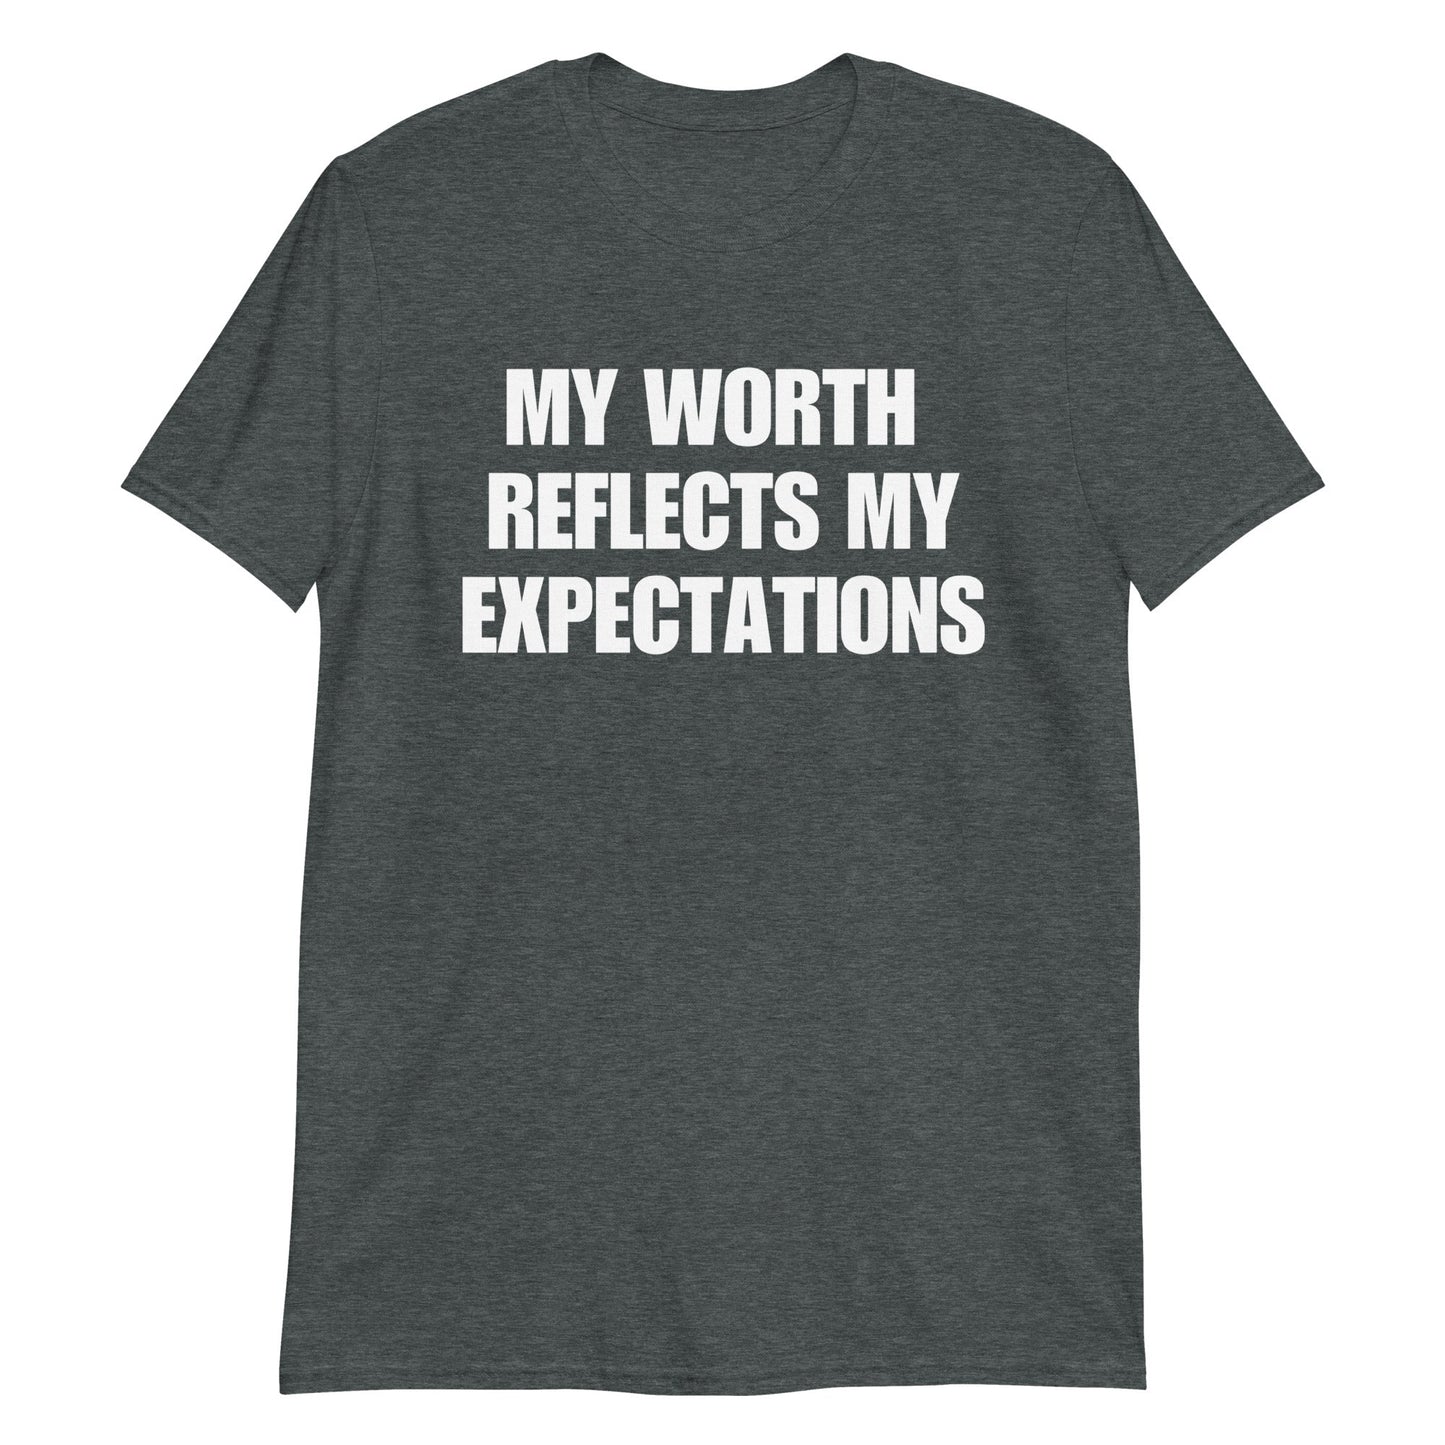 My Worth Reflects My Expectations Short-Sleeve Unisex T-Shirt - Catch This Tea Shirts